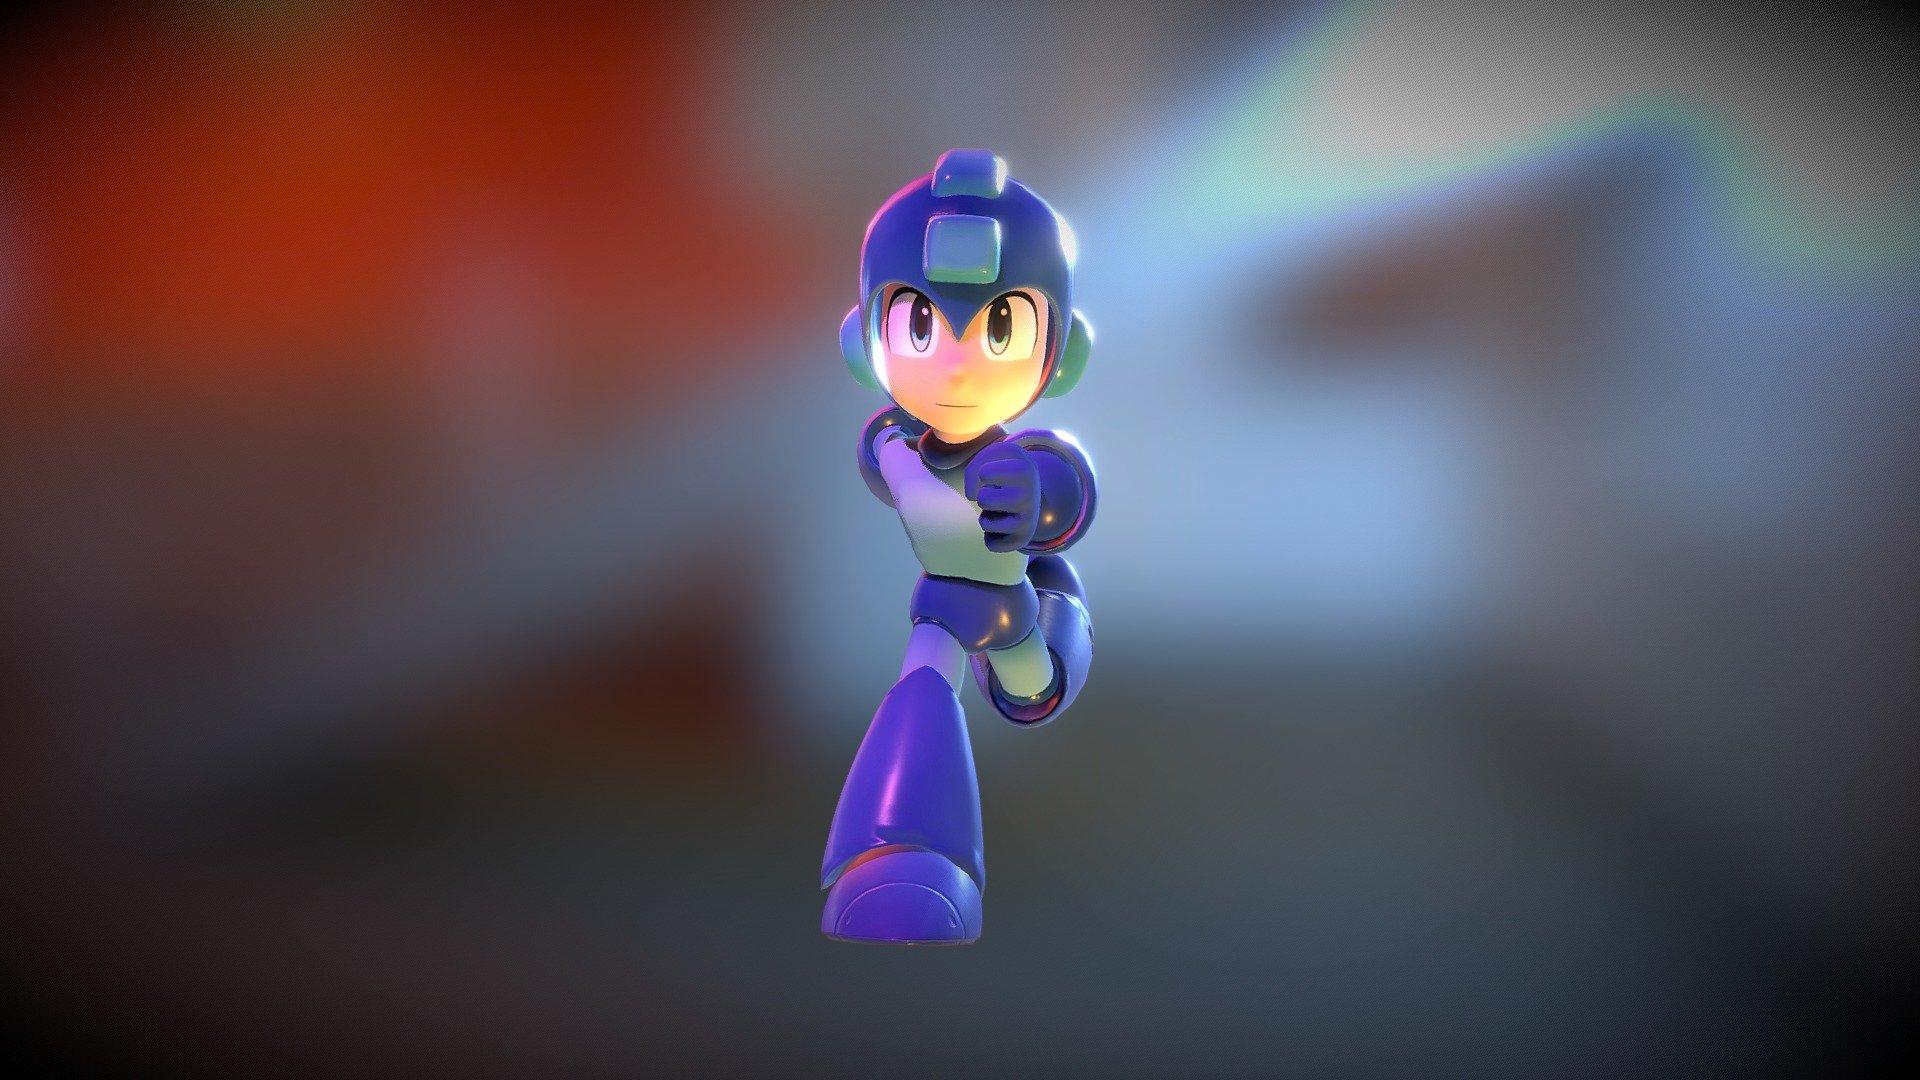 This series of games&hellip; SO GOOD.

Megaman 11 is out this year on the Nintendo Switch, and I cannot wait - this fan art proved an awesome challenge with which to skillup, and explore the animation process a bit more deeply.

Music is from Megaman (NES) - &lsquo;Cut man'.  

Character sculpt, retopo, normals baked and textures painted in 3DCoat. Model rigged and animated in Blender 3d model